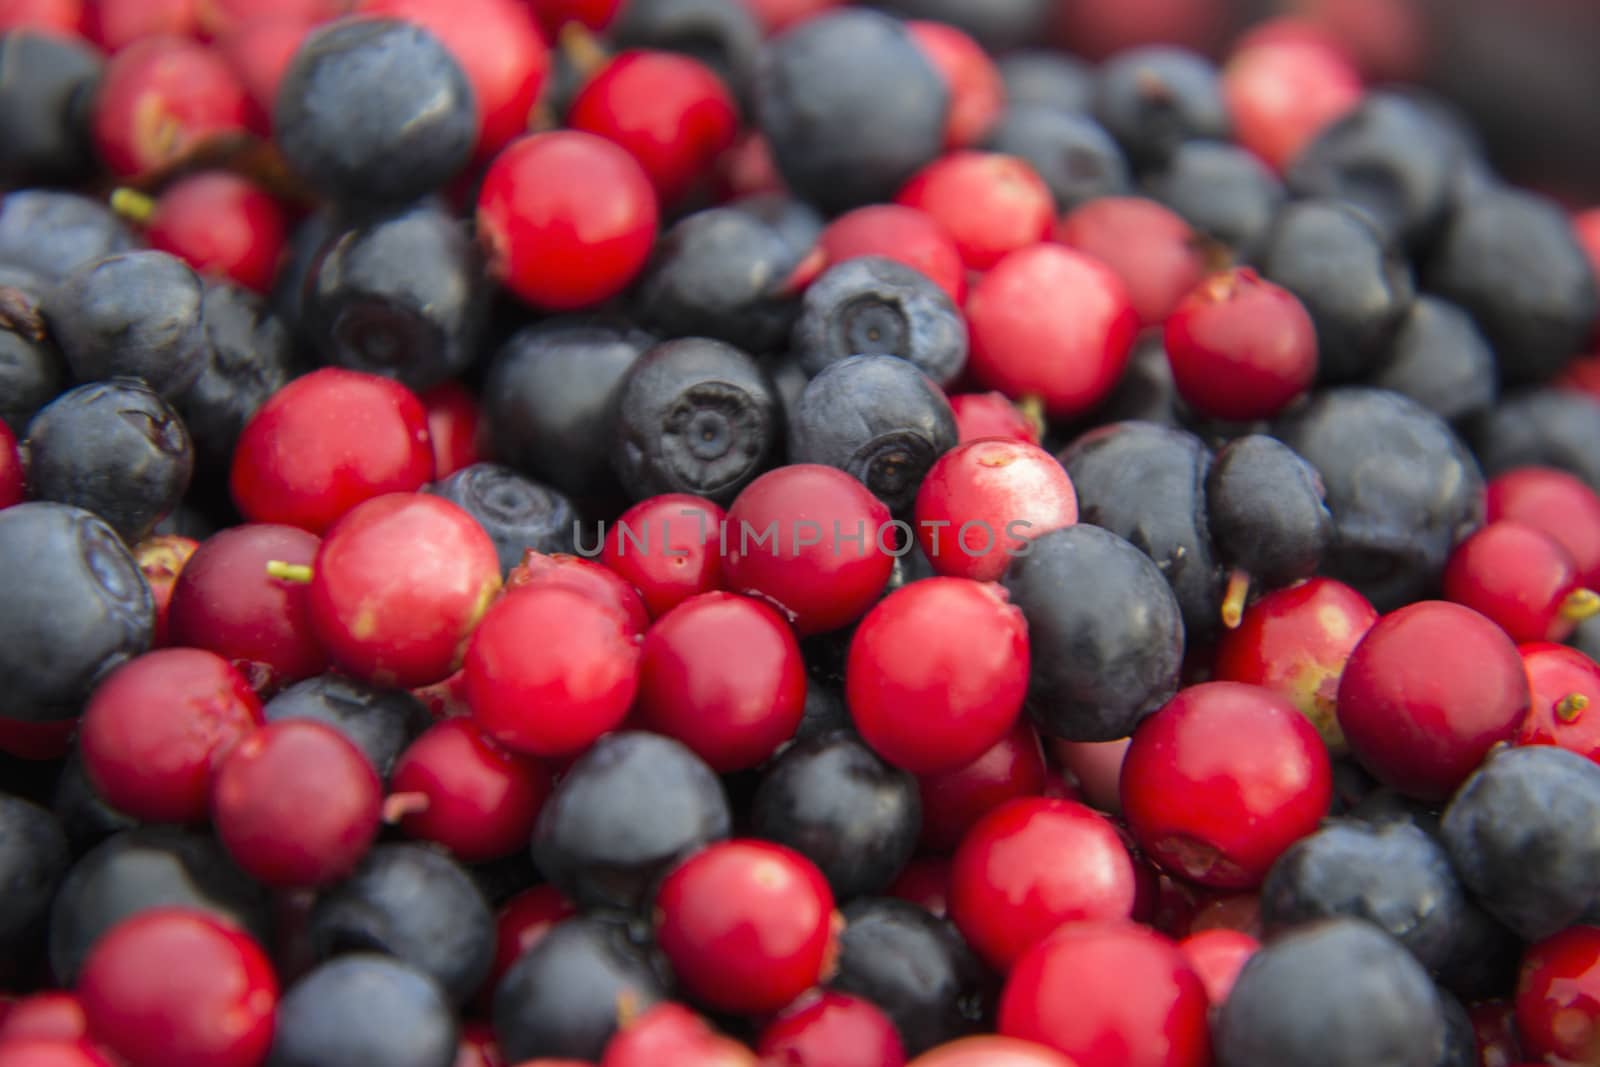 Cowberries and blueberries mixed